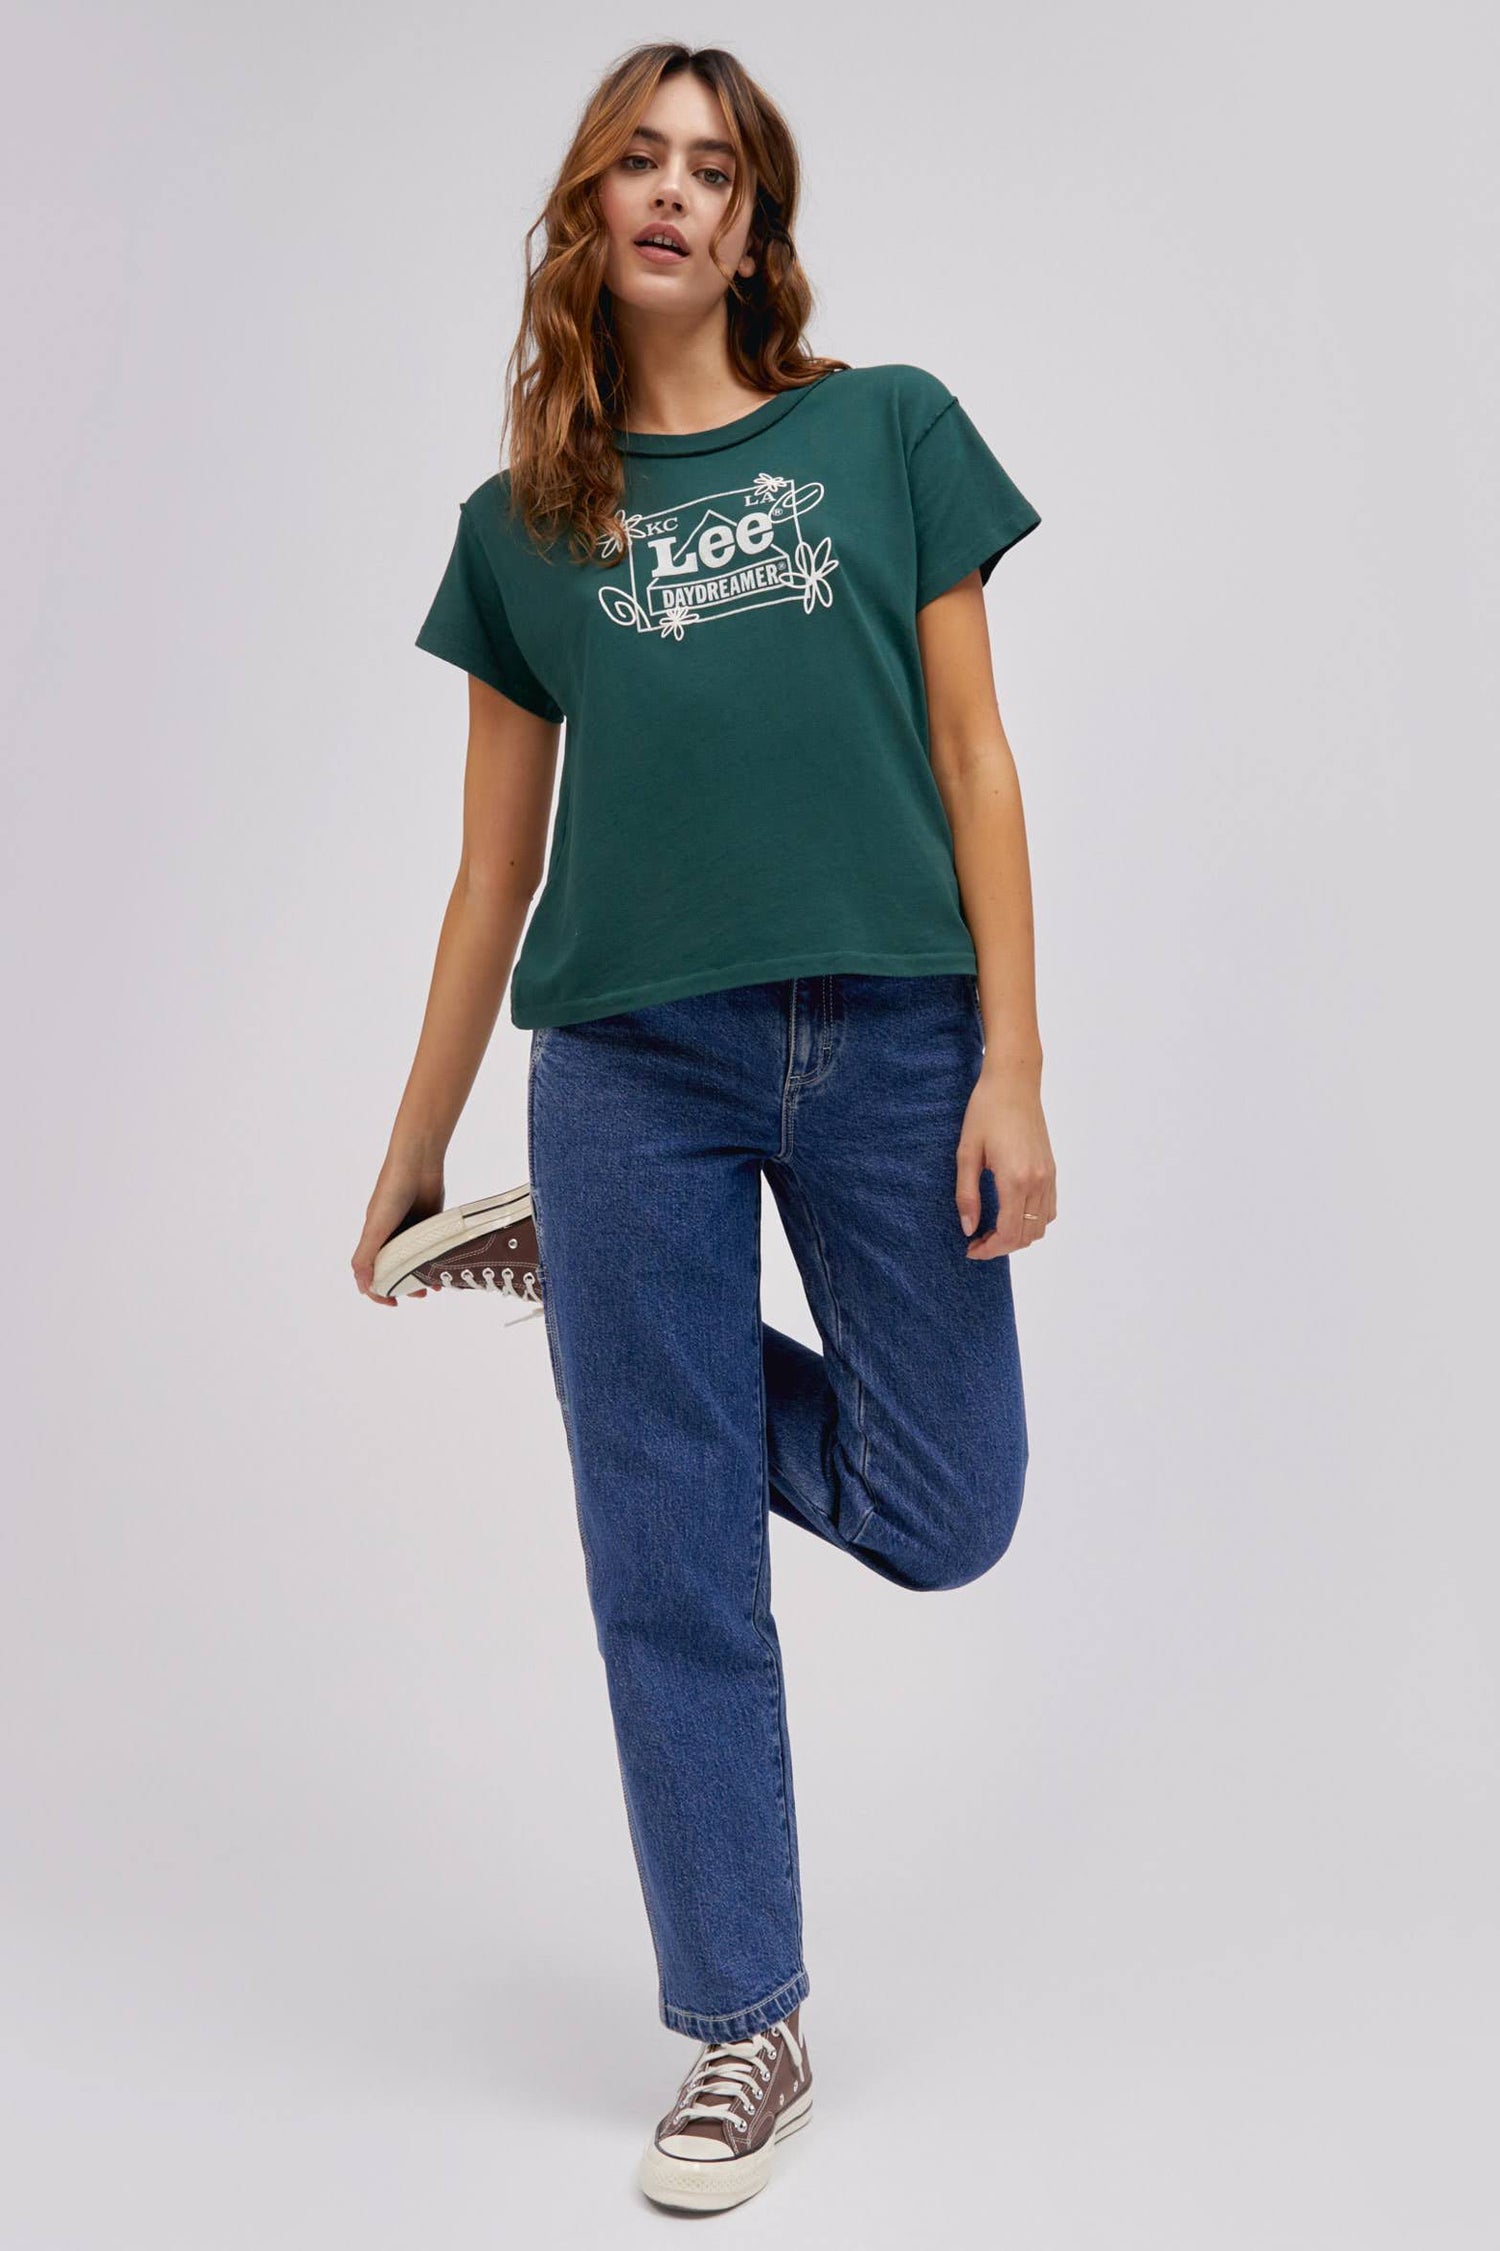 A curly-haired model featuring a pine reverse gf tee designed with the original Lee workwear logo reimagined into an exclusive, co-branded graphic with layered doodles in puff ink.